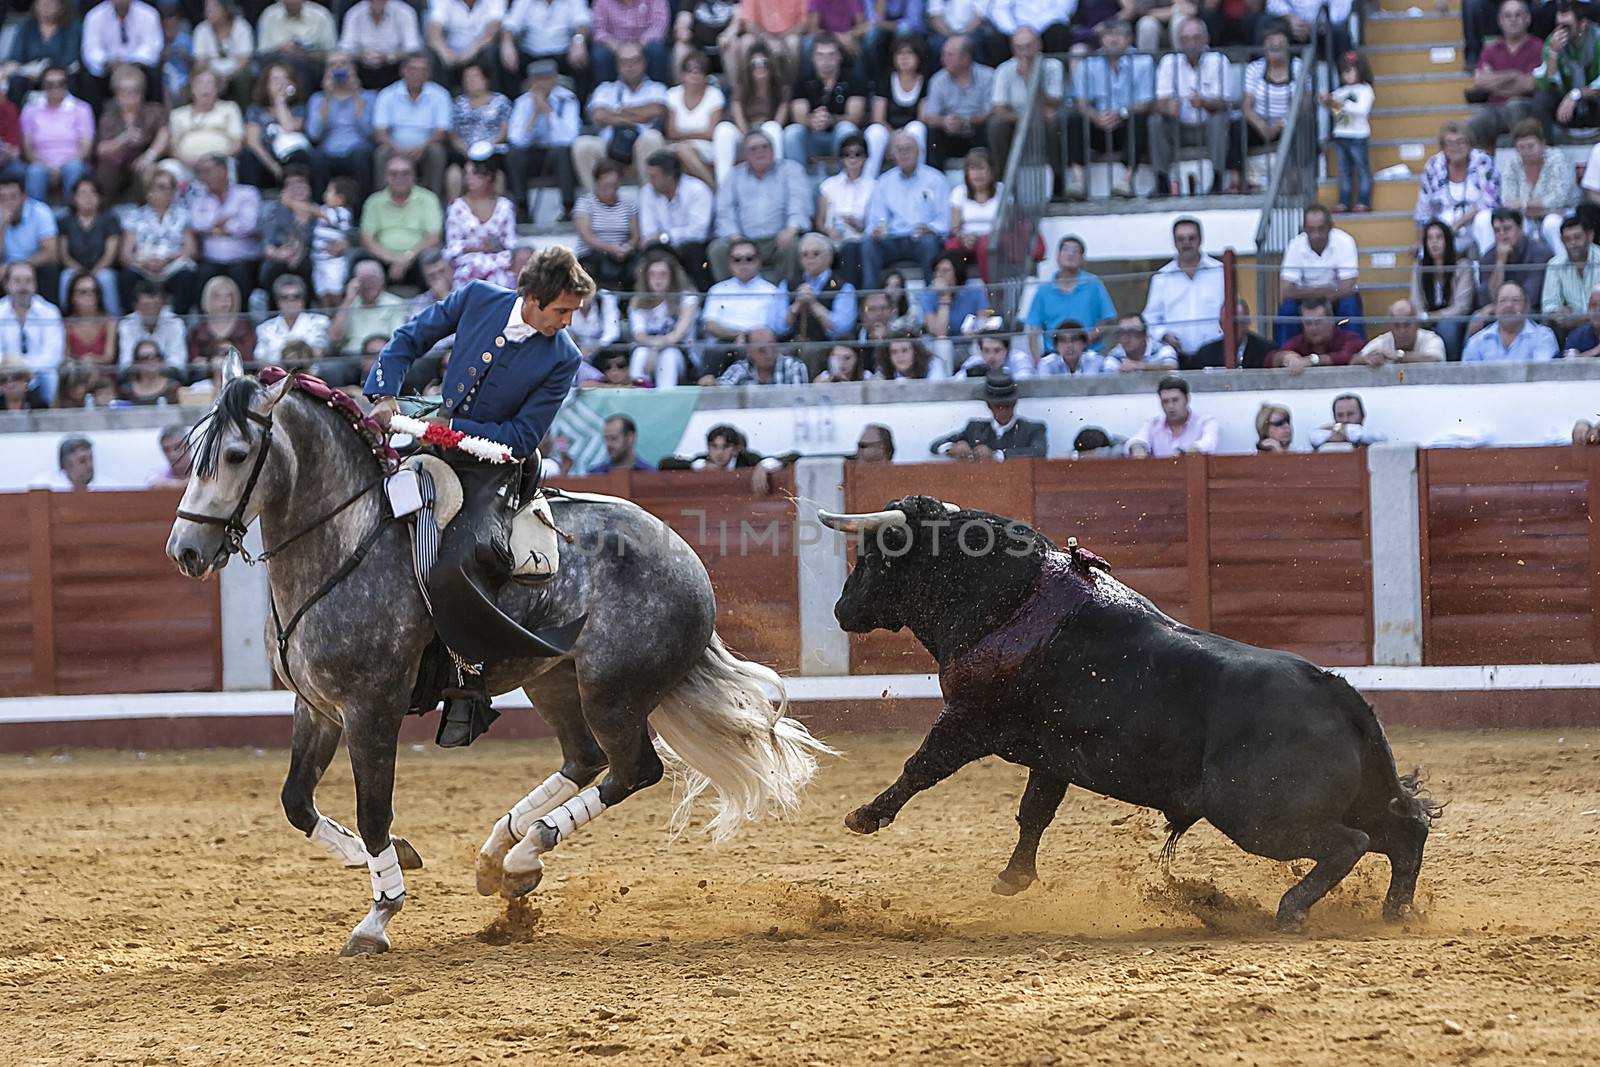 Pozoblanco, Cordoba province, SPAIN- 25 september 2011: Spanish bullfighter on horseback Pablo Hermoso de Mendoza bullfighting on horseback, brave bull tries to catch the horse jumping, but the horse makes a wheelie and escape in Pozoblanco, Cordoba province, Andalusia, Spain